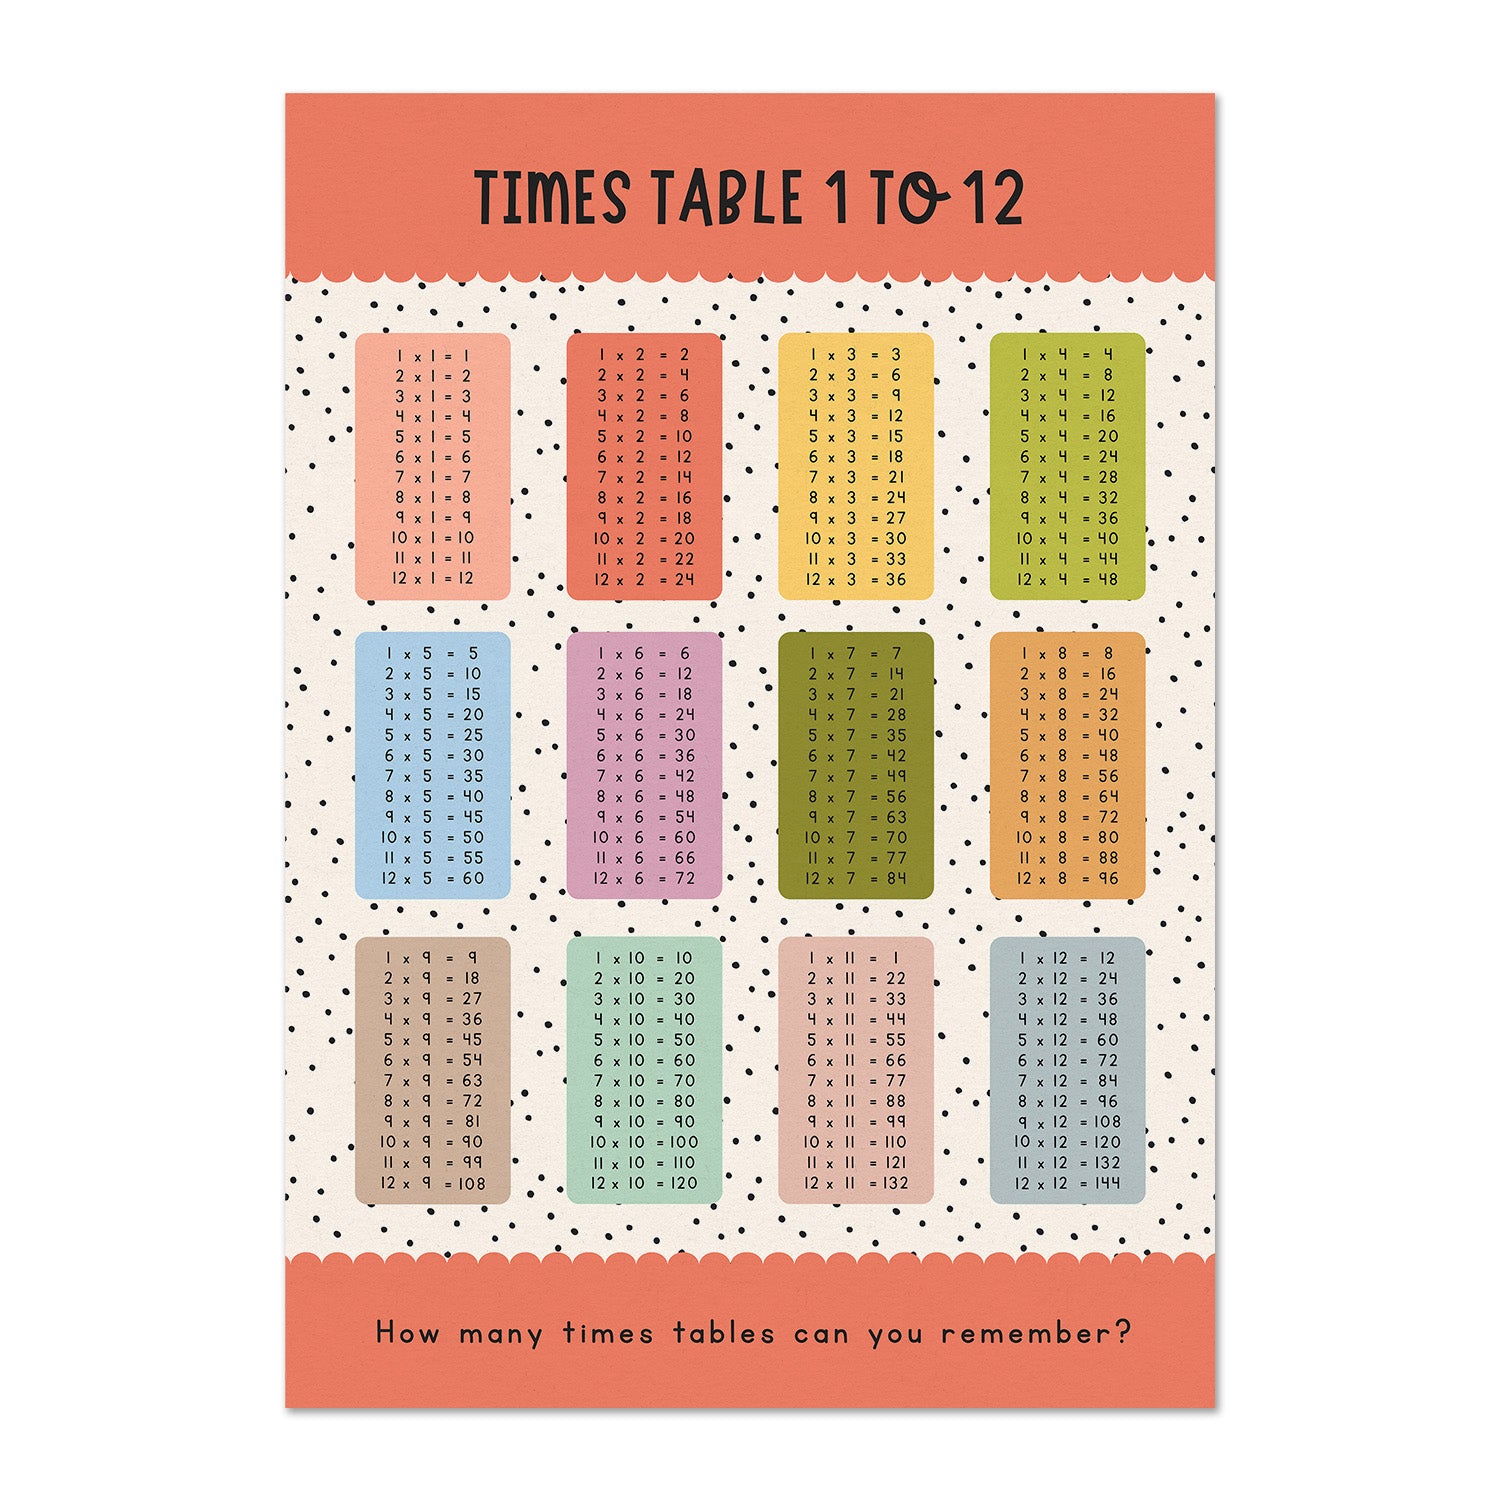 Learning Times Tables 1 to 12